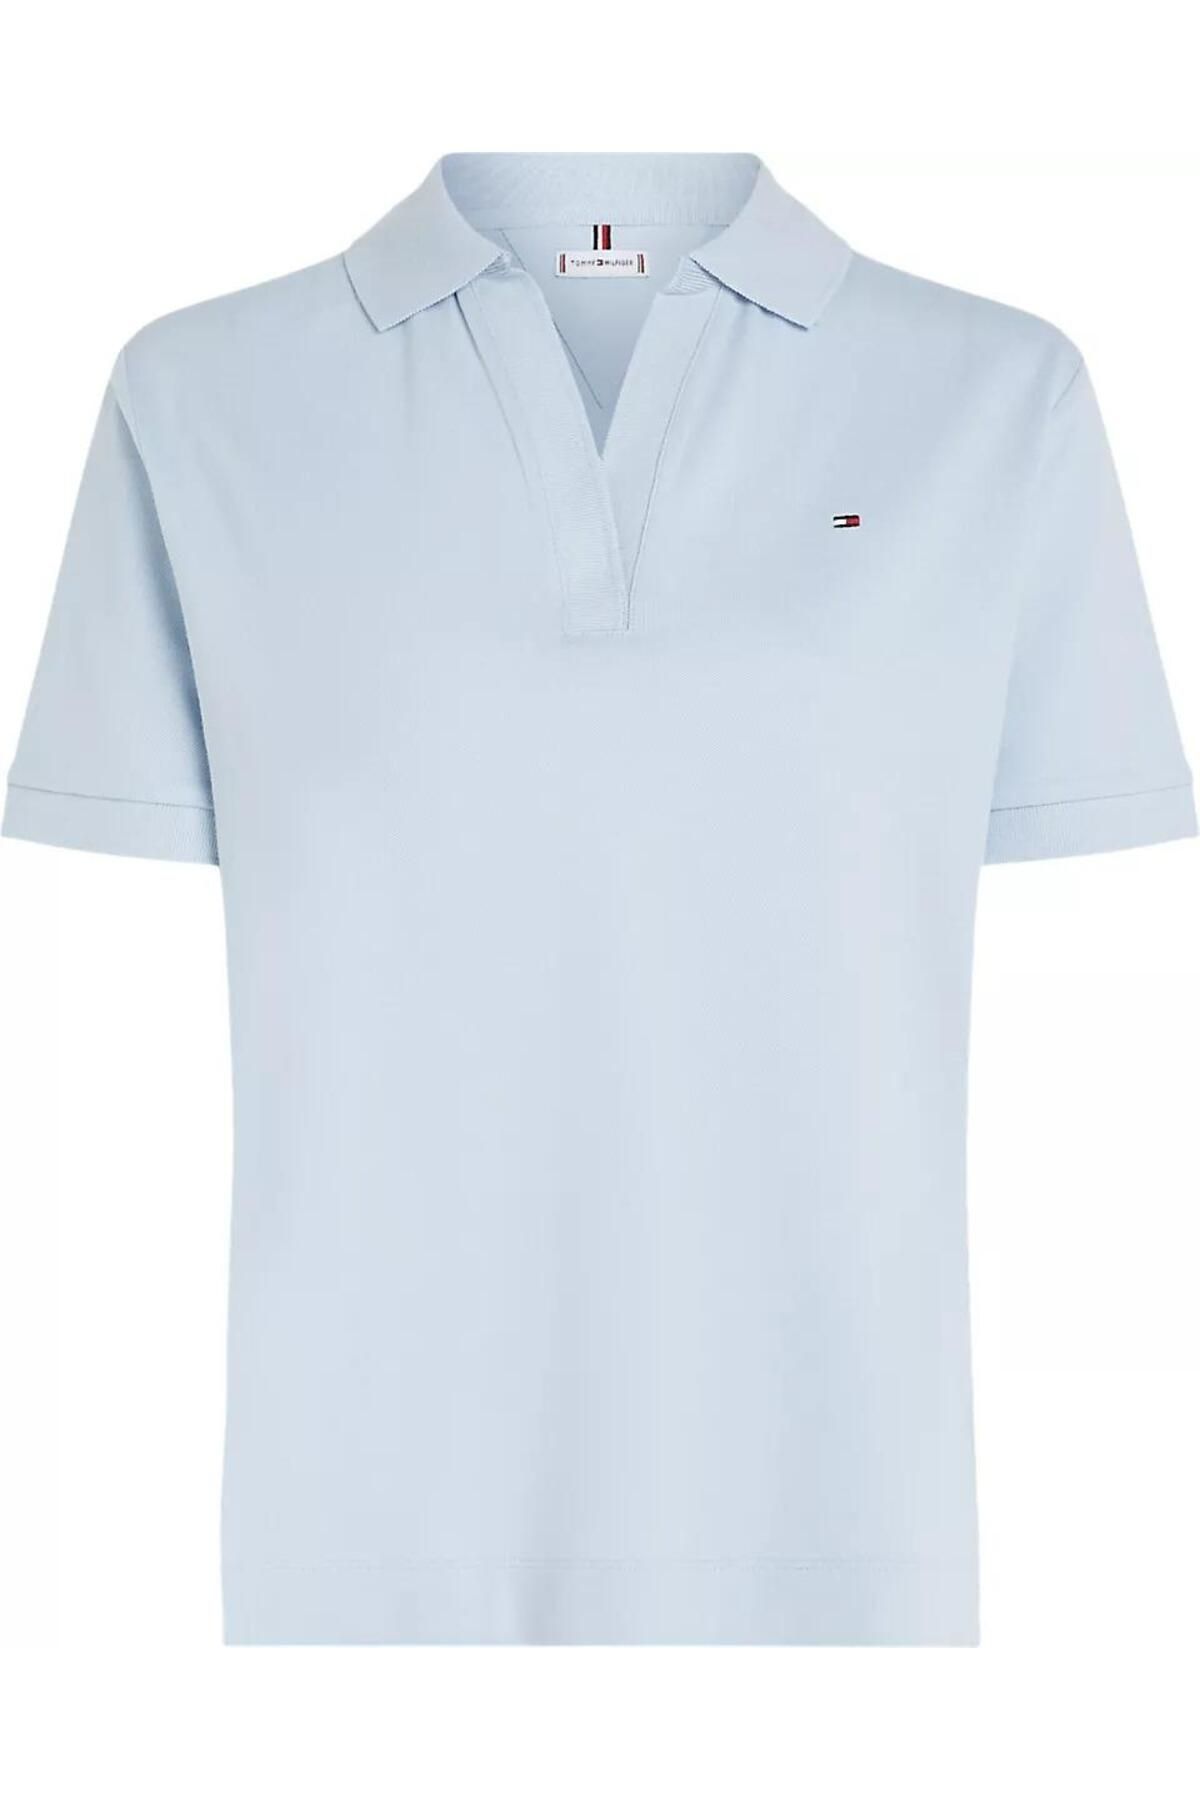 Tommy Hilfiger RLX OPEN PLACKET LYOCELL POLO SS